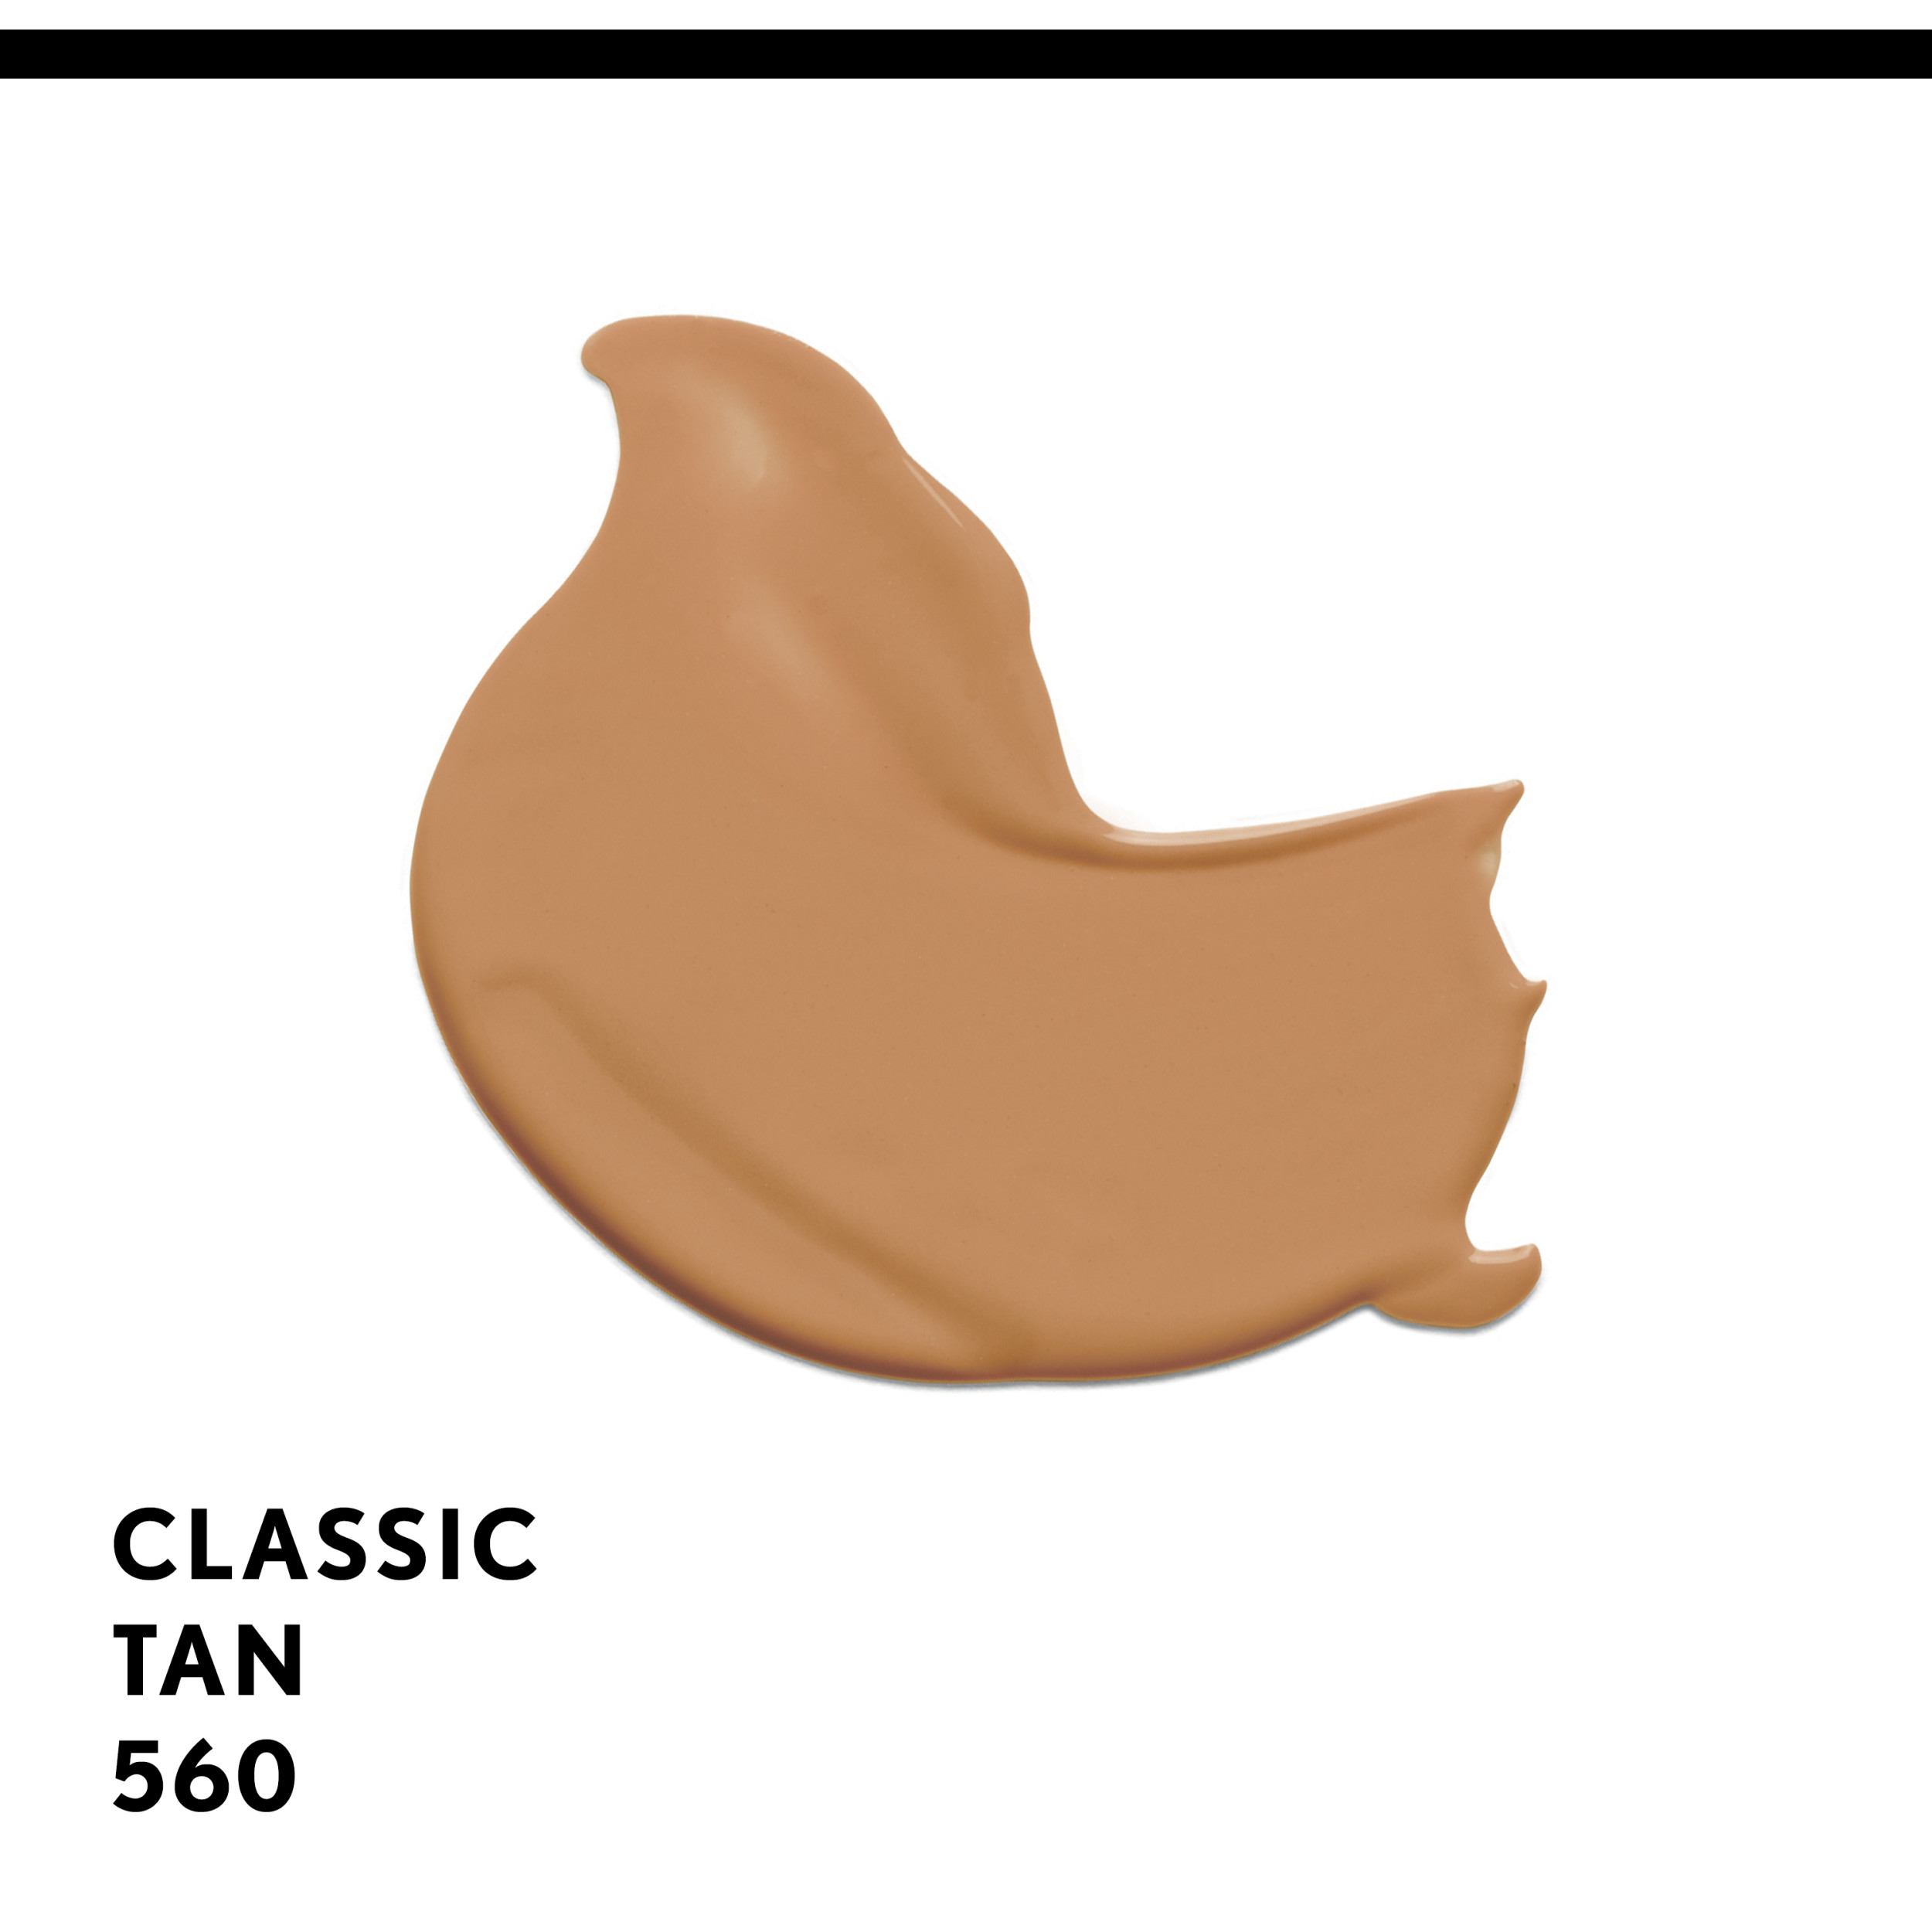 COVERGIRL Clean Matte Liquid Foundation, 560 Classic Tan, 1 oz, Liquid Foundation, Matte Foundation, Lightweight Foundation, Moisturizing Foundation, Water Based Foundation - image 2 of 8